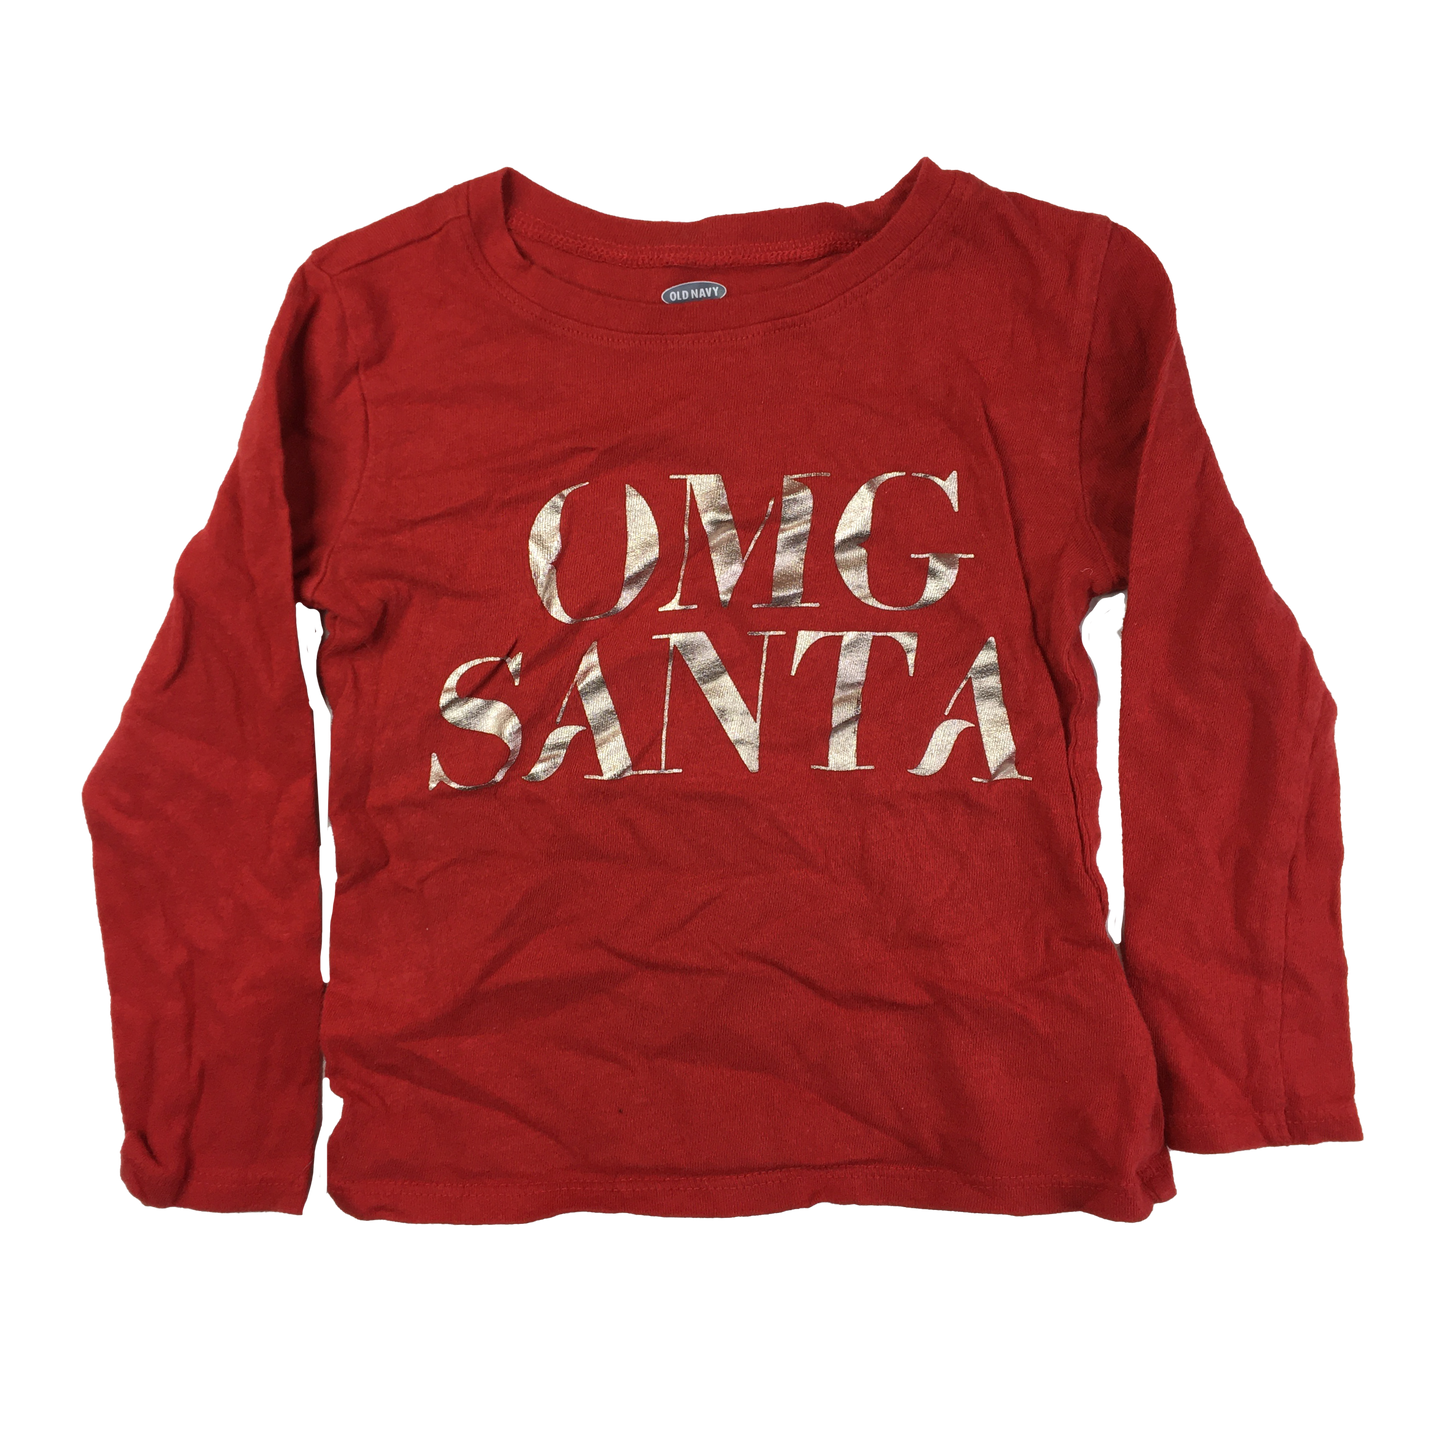 The Children's Place Red Long Sleeve with "OMG SANTA" 2T